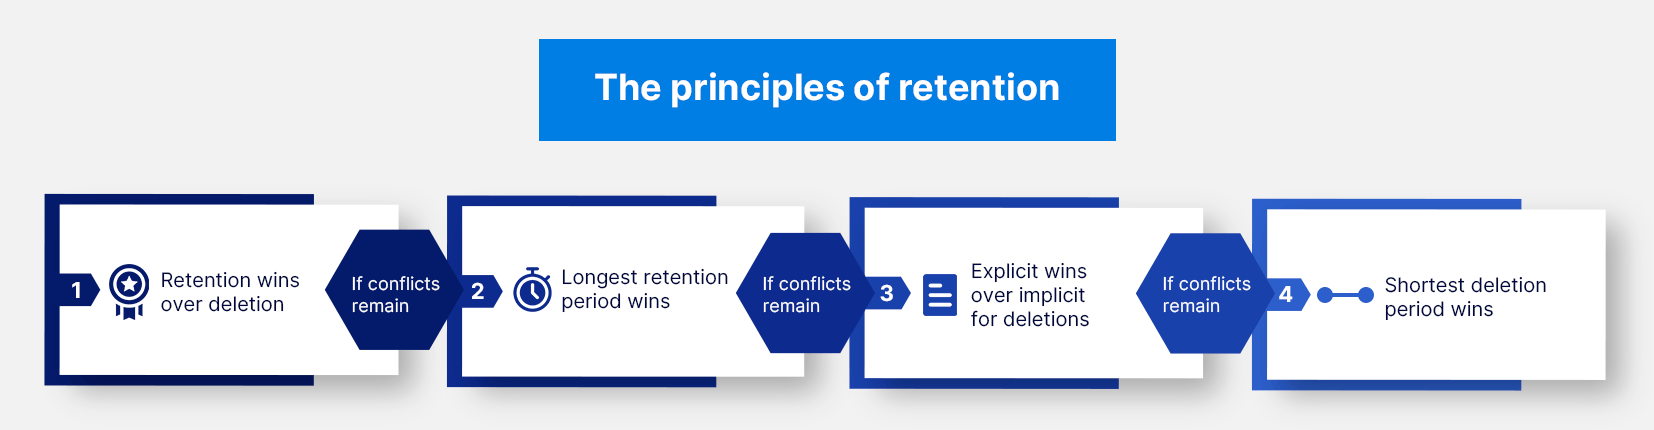 office 365 retention policy: principles of retention